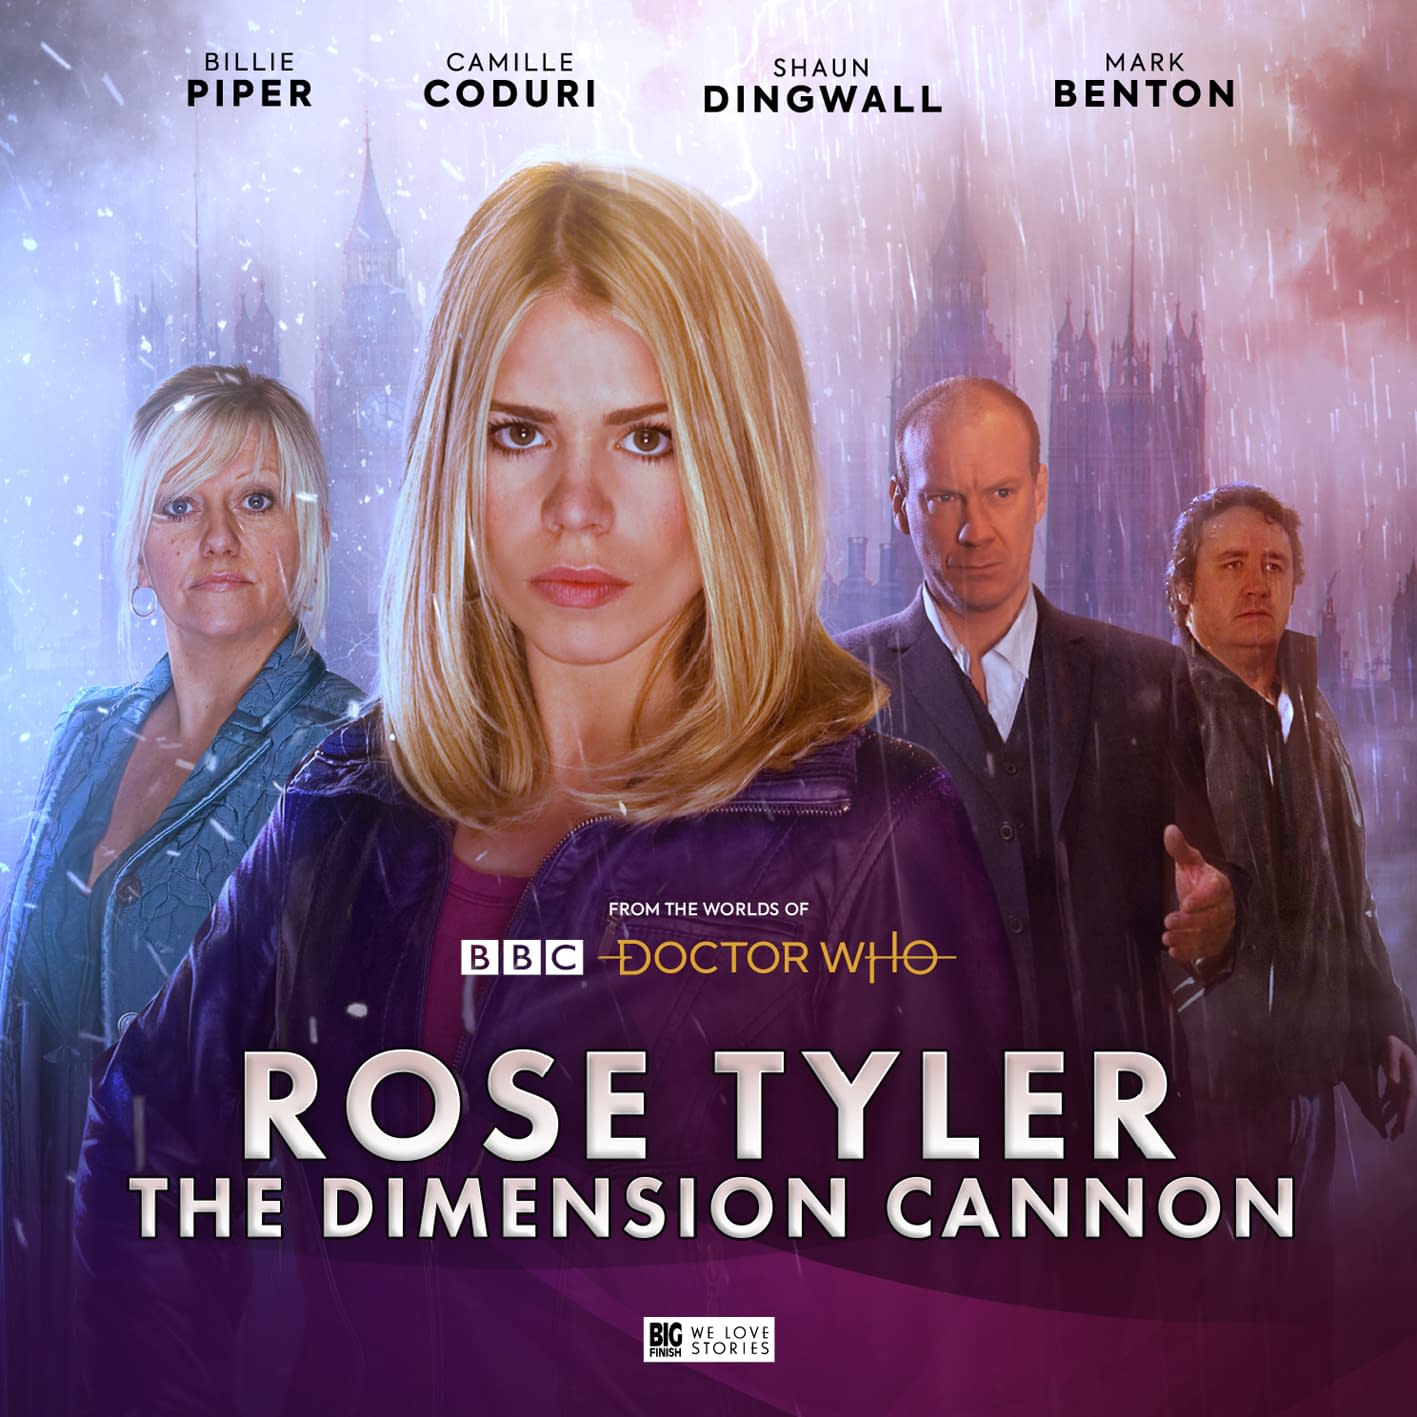 "Doctor Who": Russell T. Davies' Road to "Rose Tyler: The Dimension Cannon" Began as "New Who" Spinoff